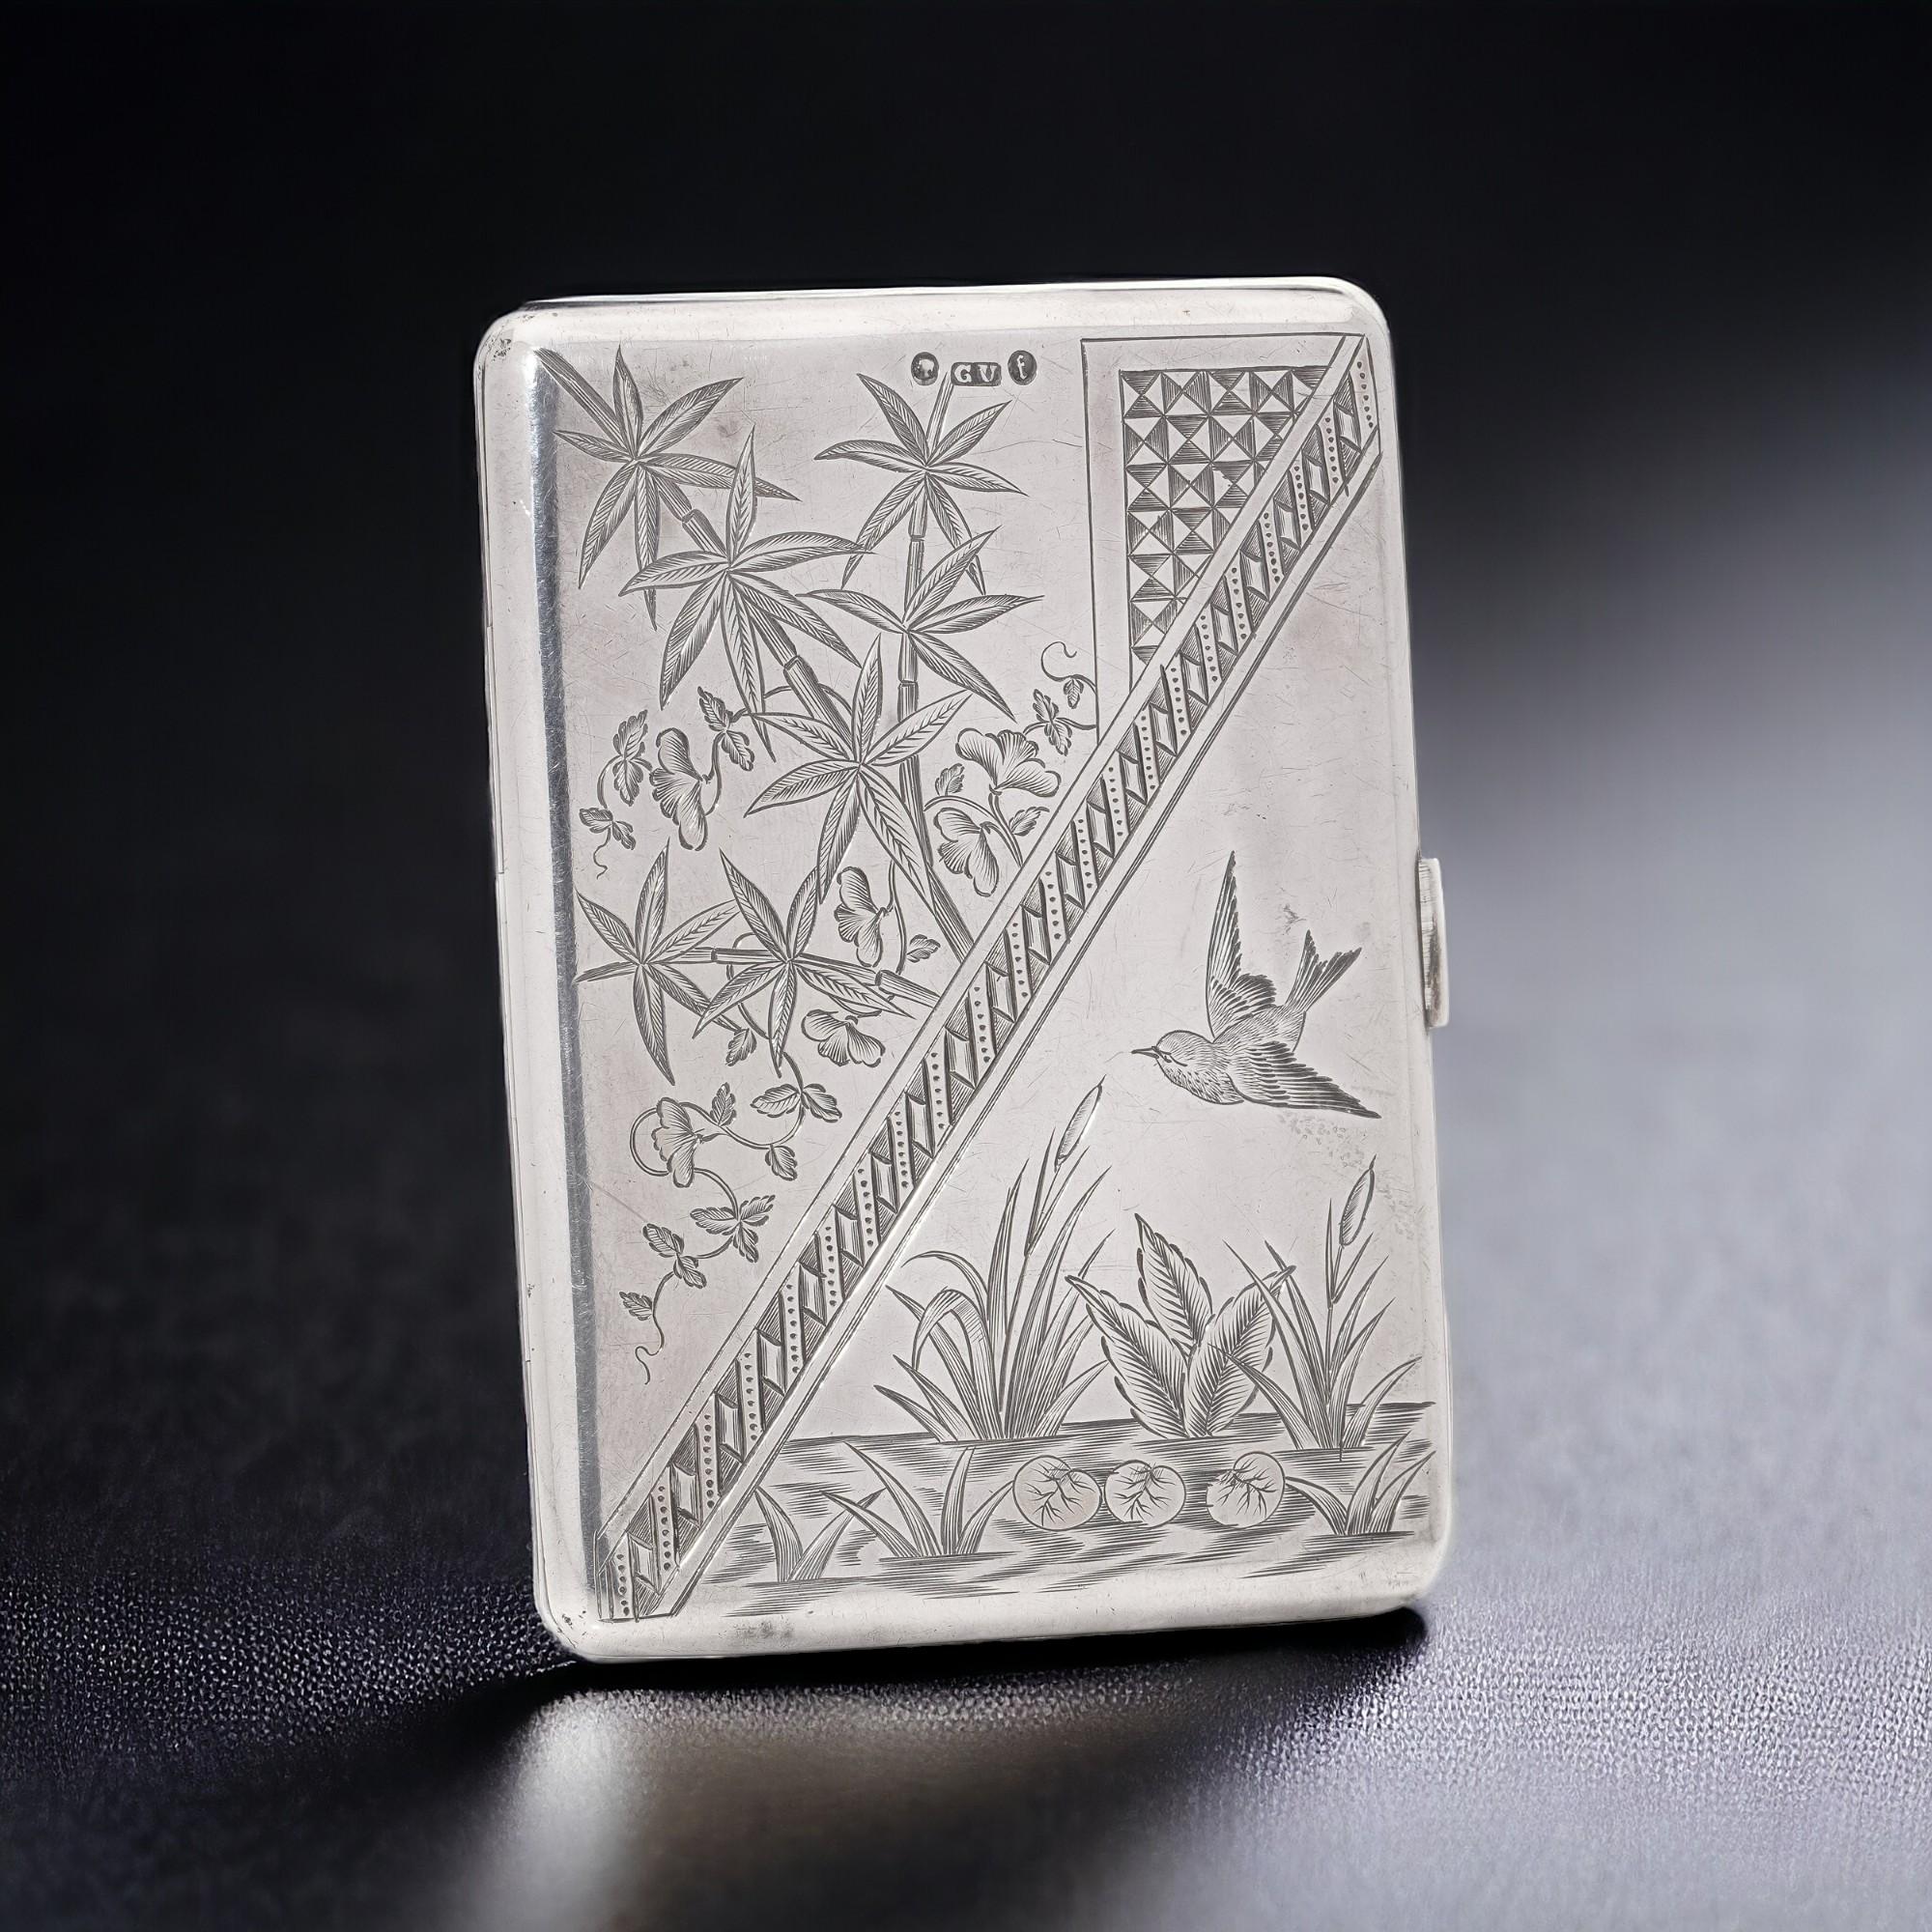 A beautifully embellished Victorian 925 sterling silver card case that intricately captures the enchanting influence of Japanese aesthetics prevalent during the Aesthetic Movement era. 

The obverse side showcases a dainty bird gracefully darting